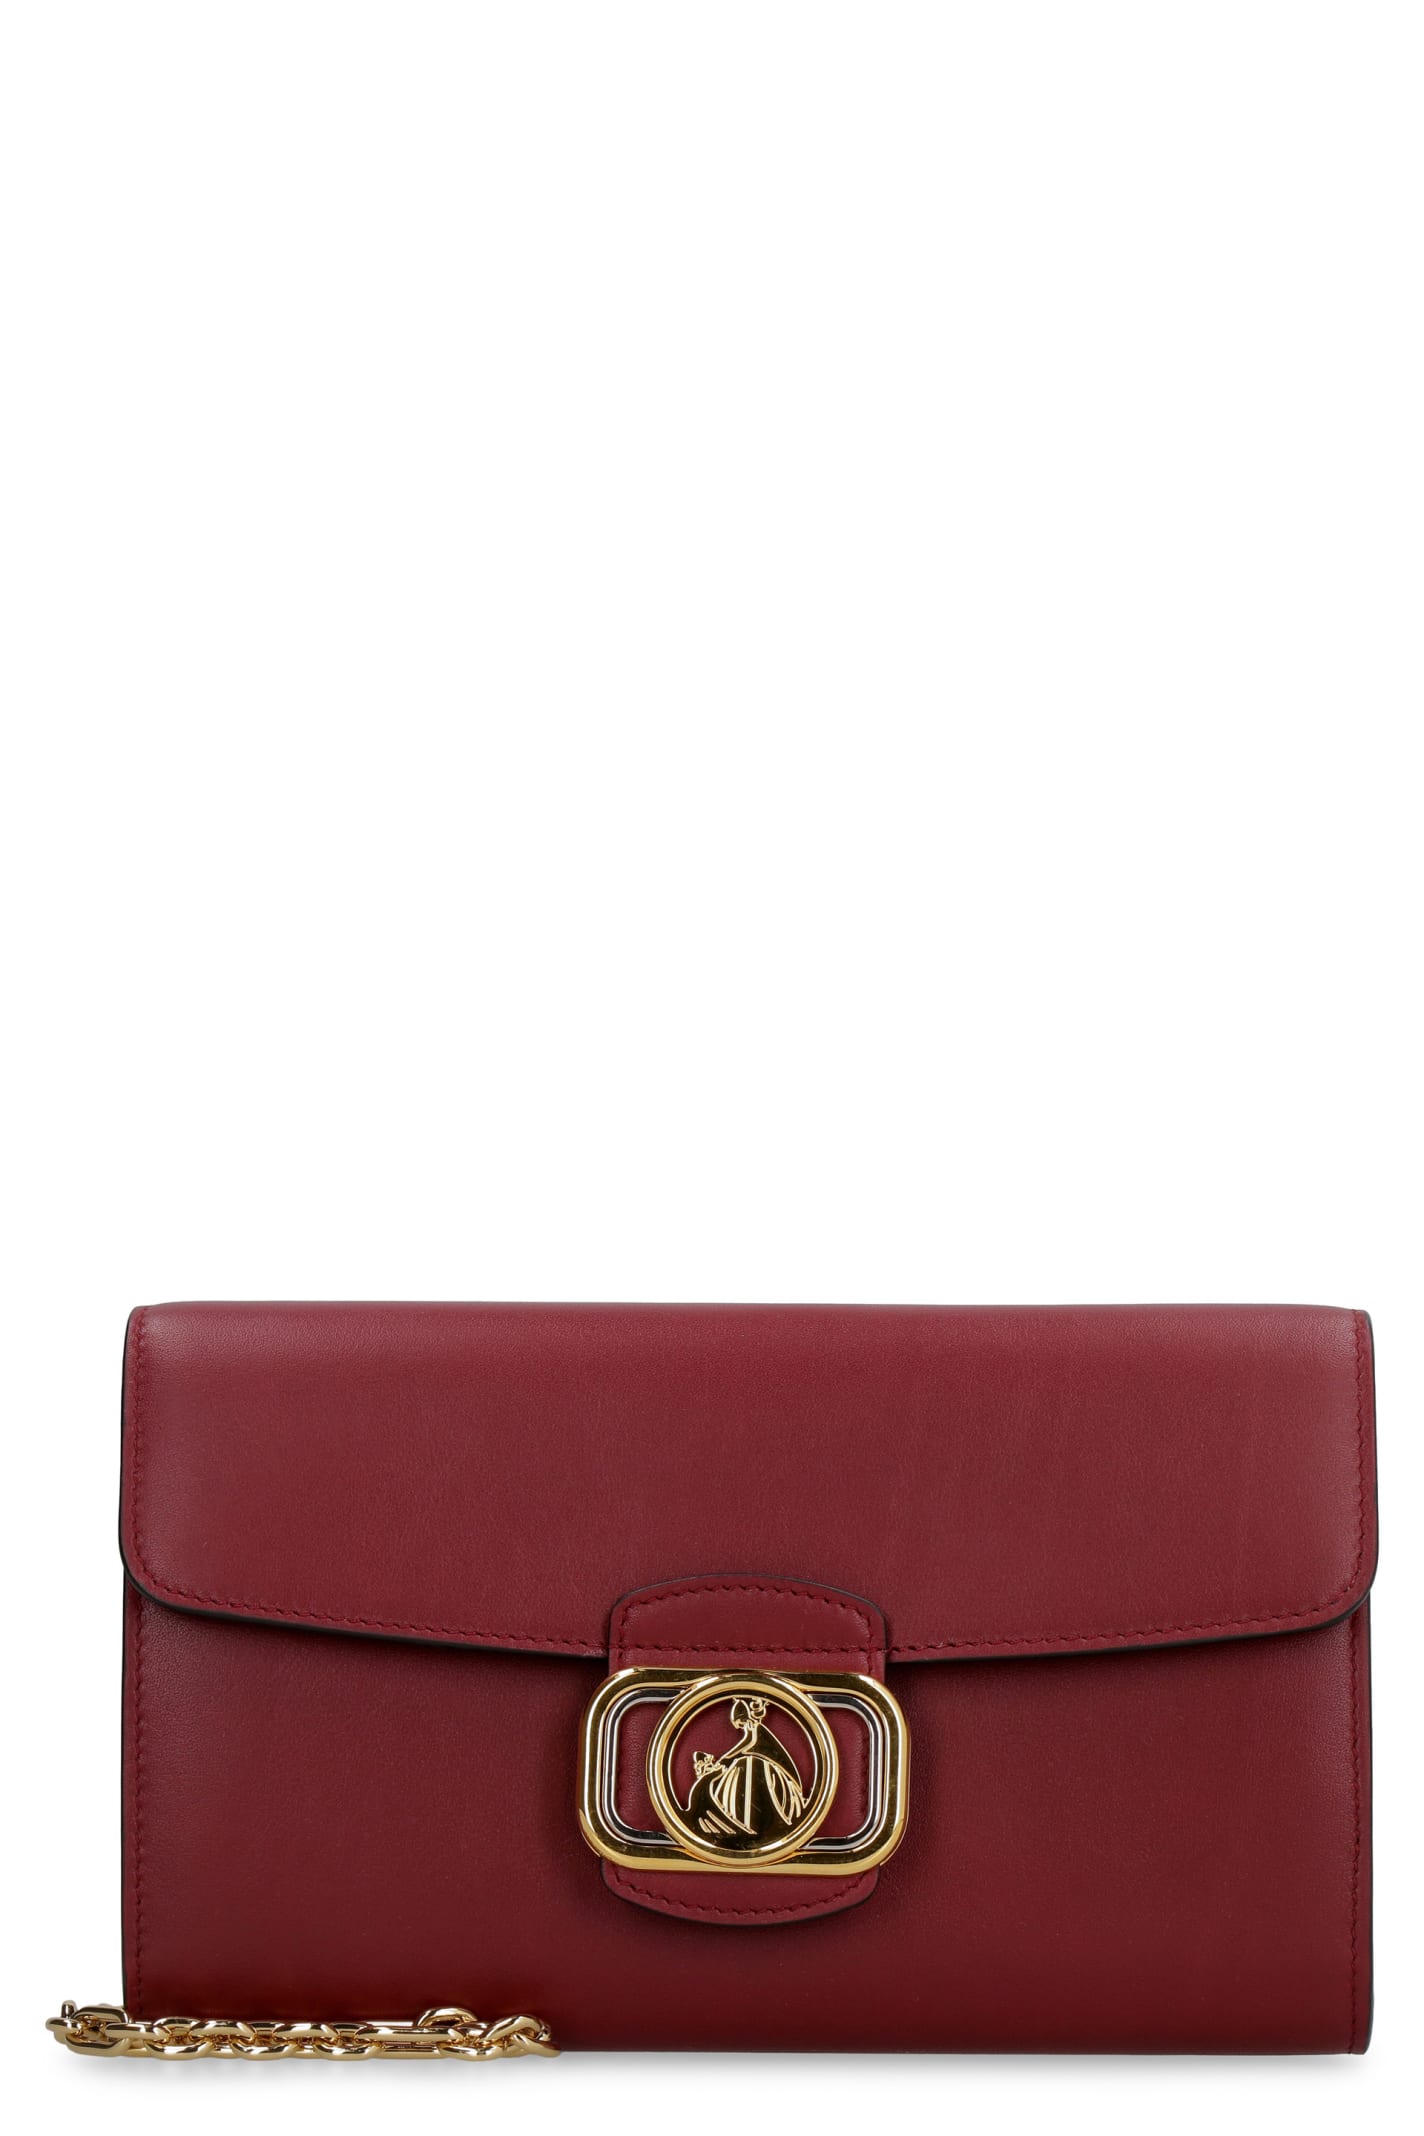 Lanvin Leather Clutch With Strap